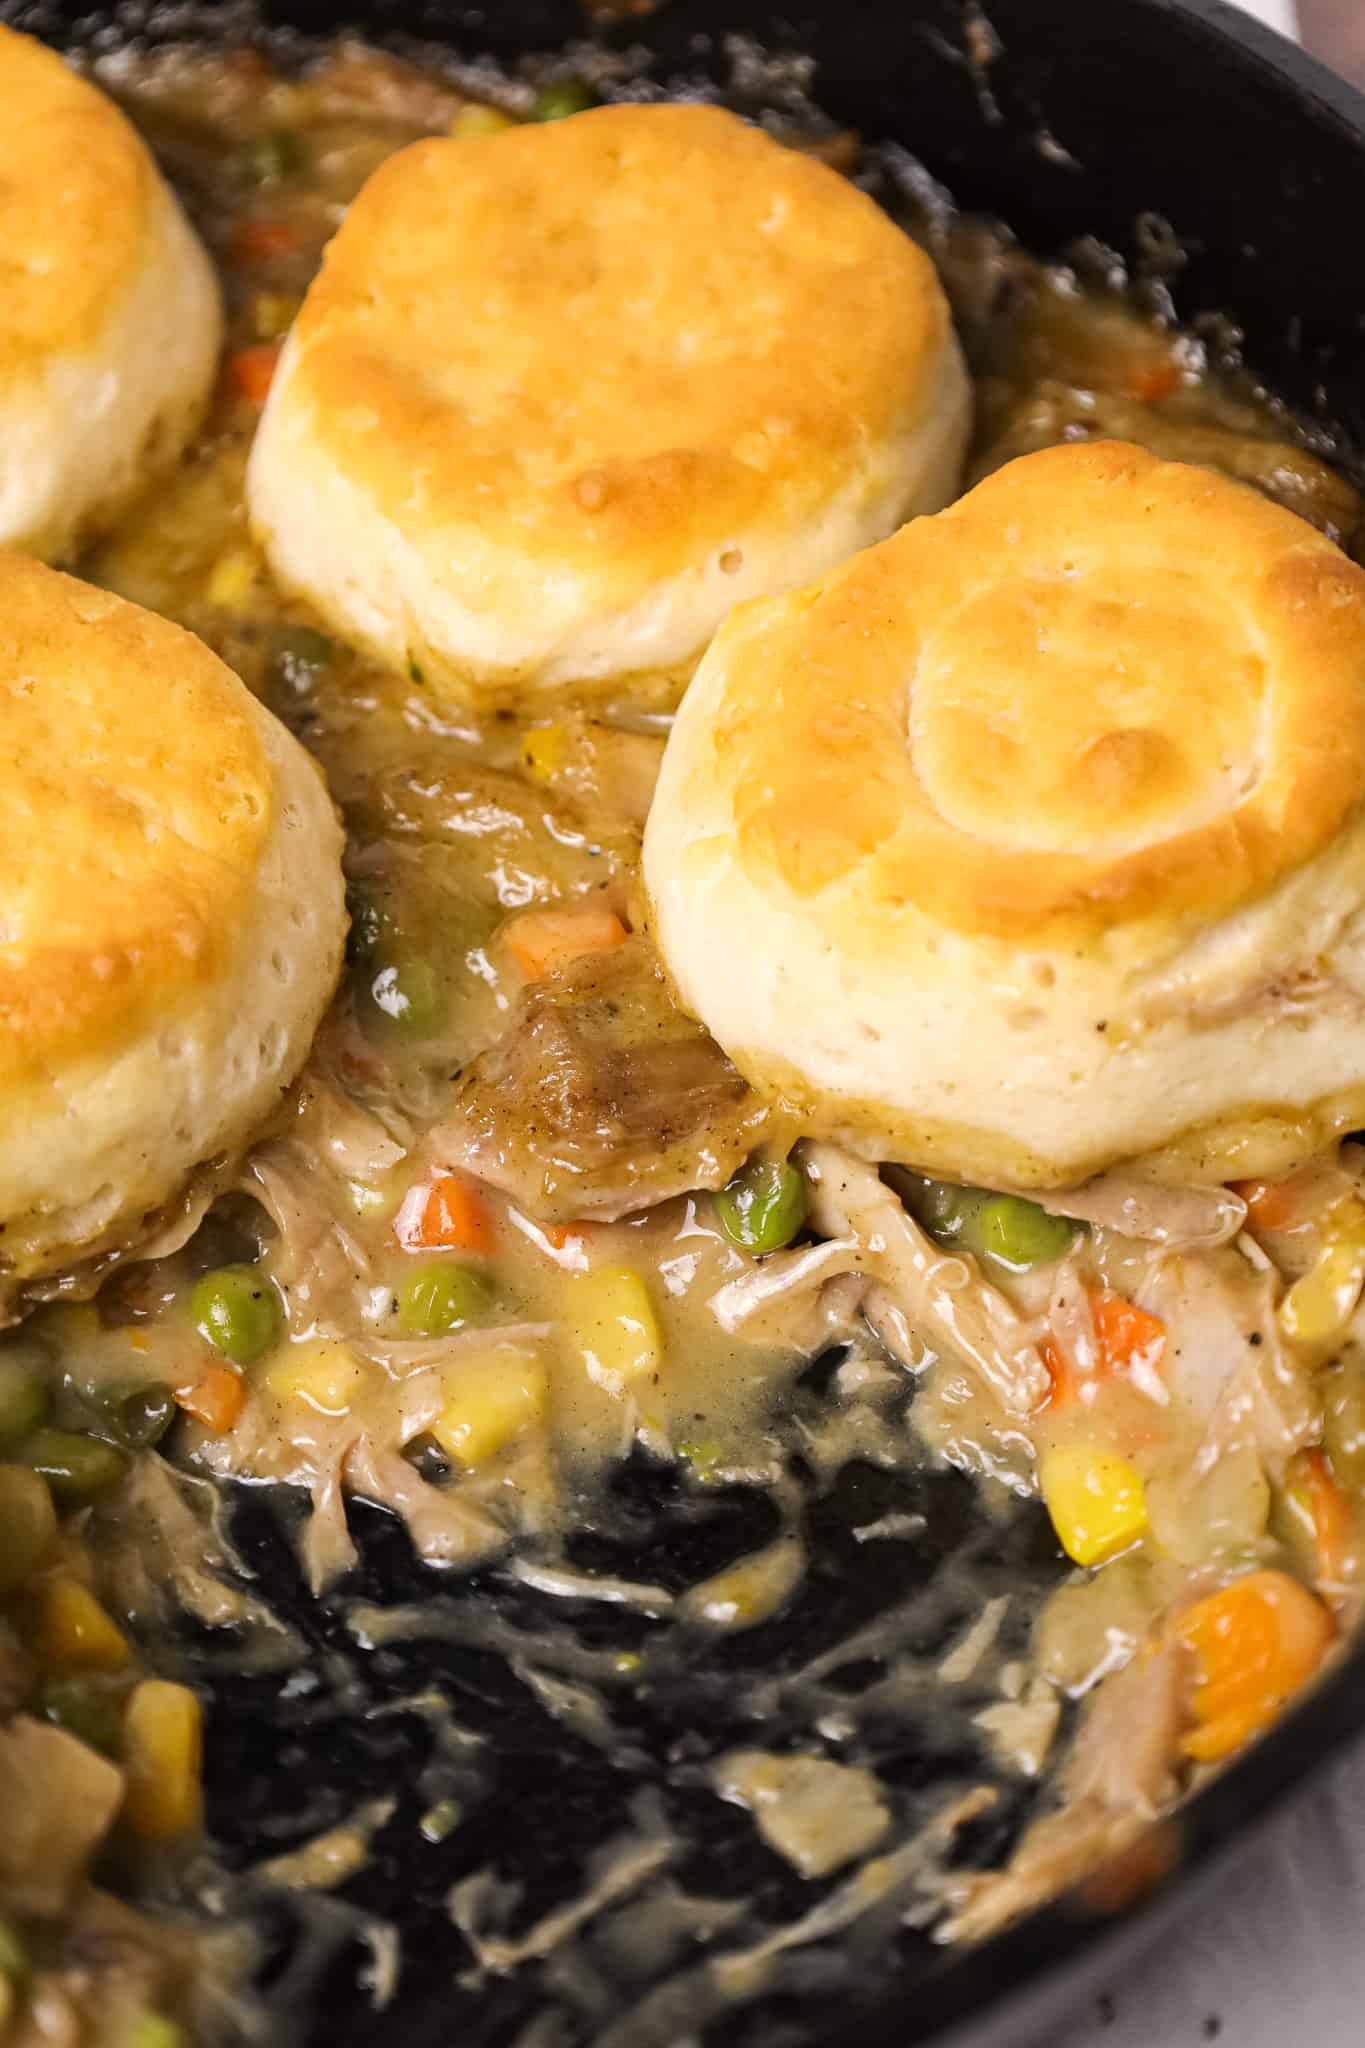 Turkey Pot Pie with Biscuits is an easy recipe loaded with frozen veggies, leftover Thanksgiving turkey, cream of chicken soup and refrigerated biscuits.